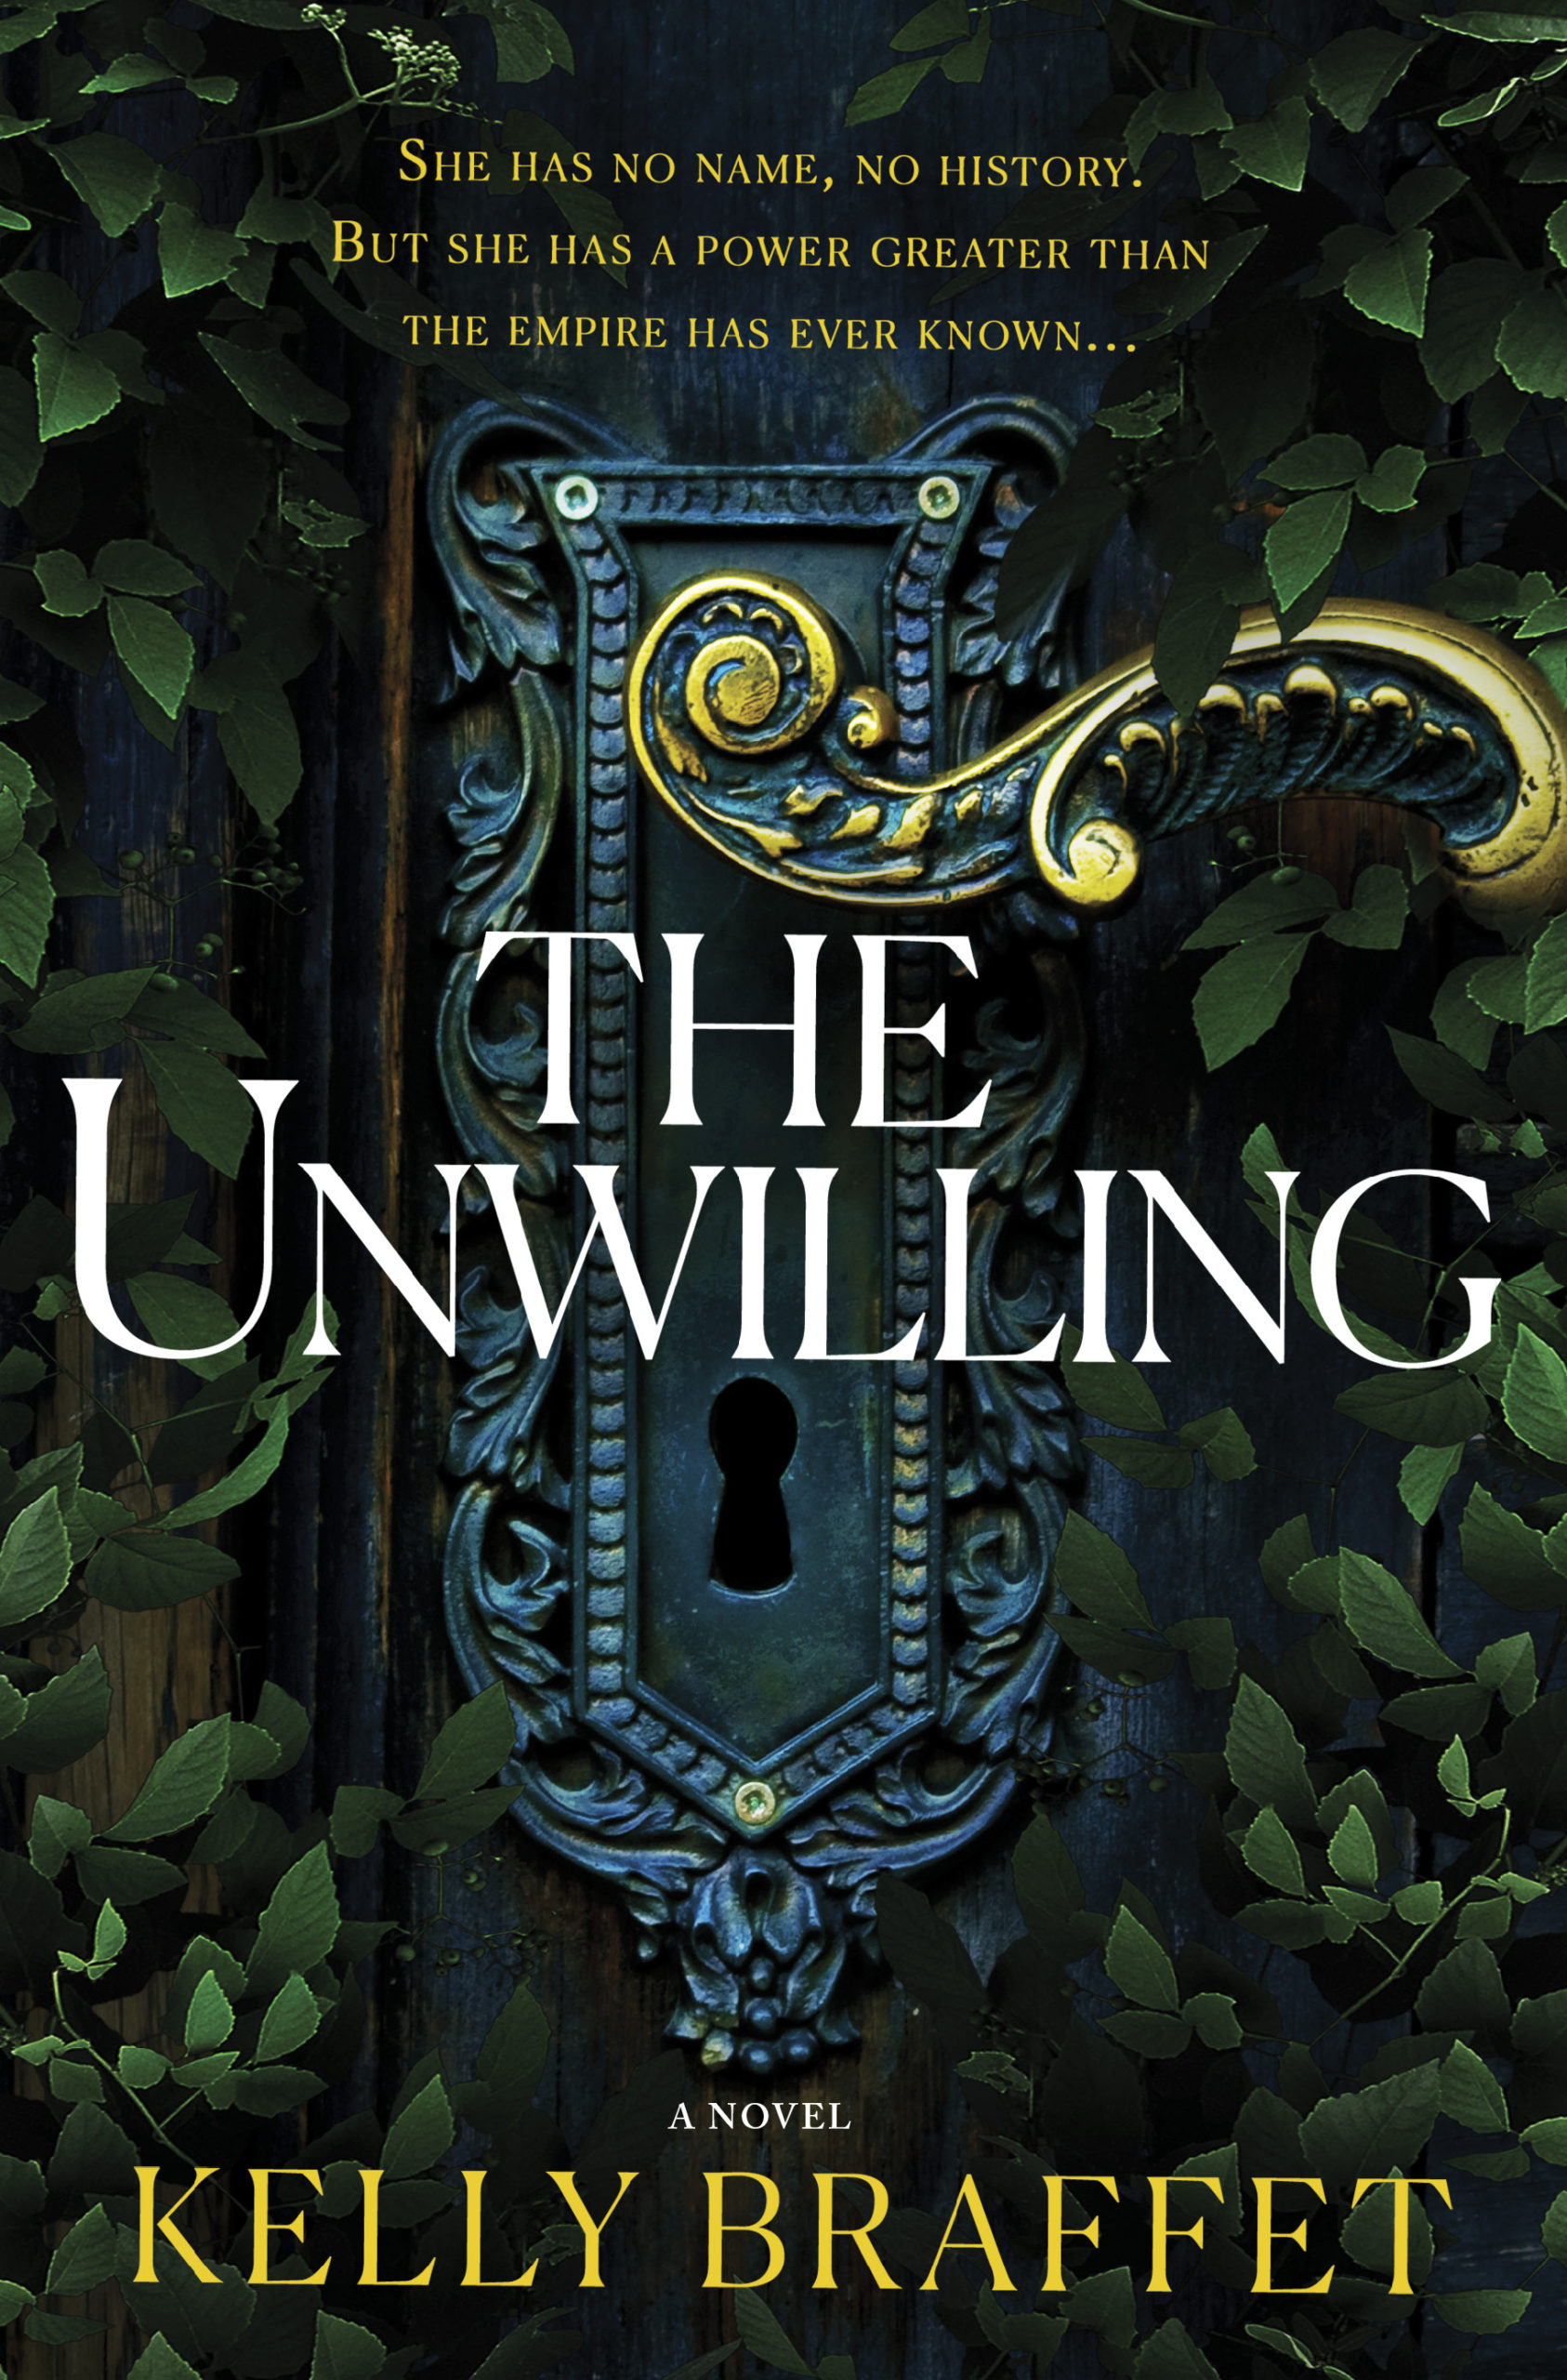 ARC Review: “The Unwilling” by Kelly Braffet